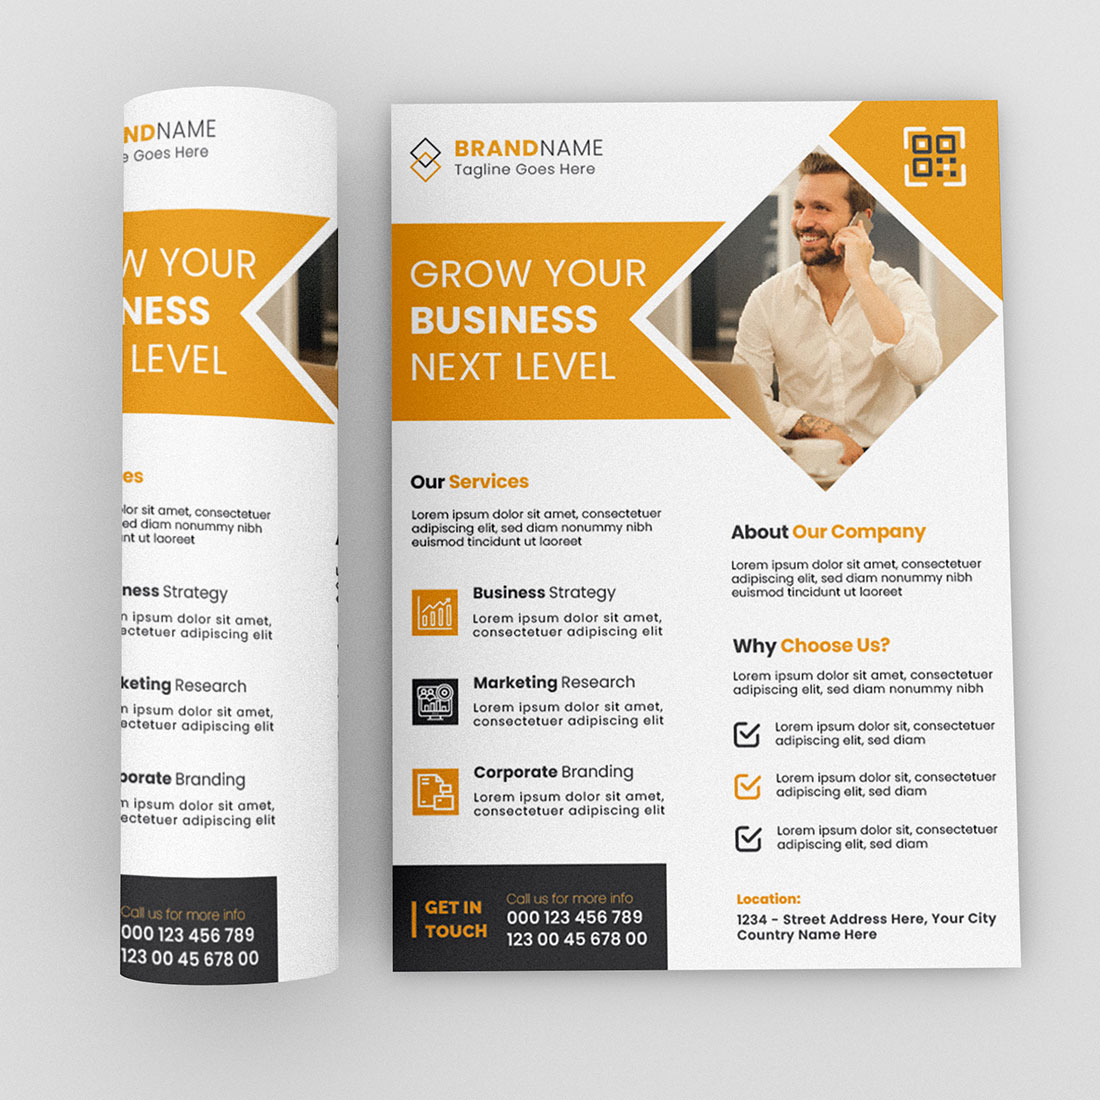 Image of colorful business flyer template in yellow